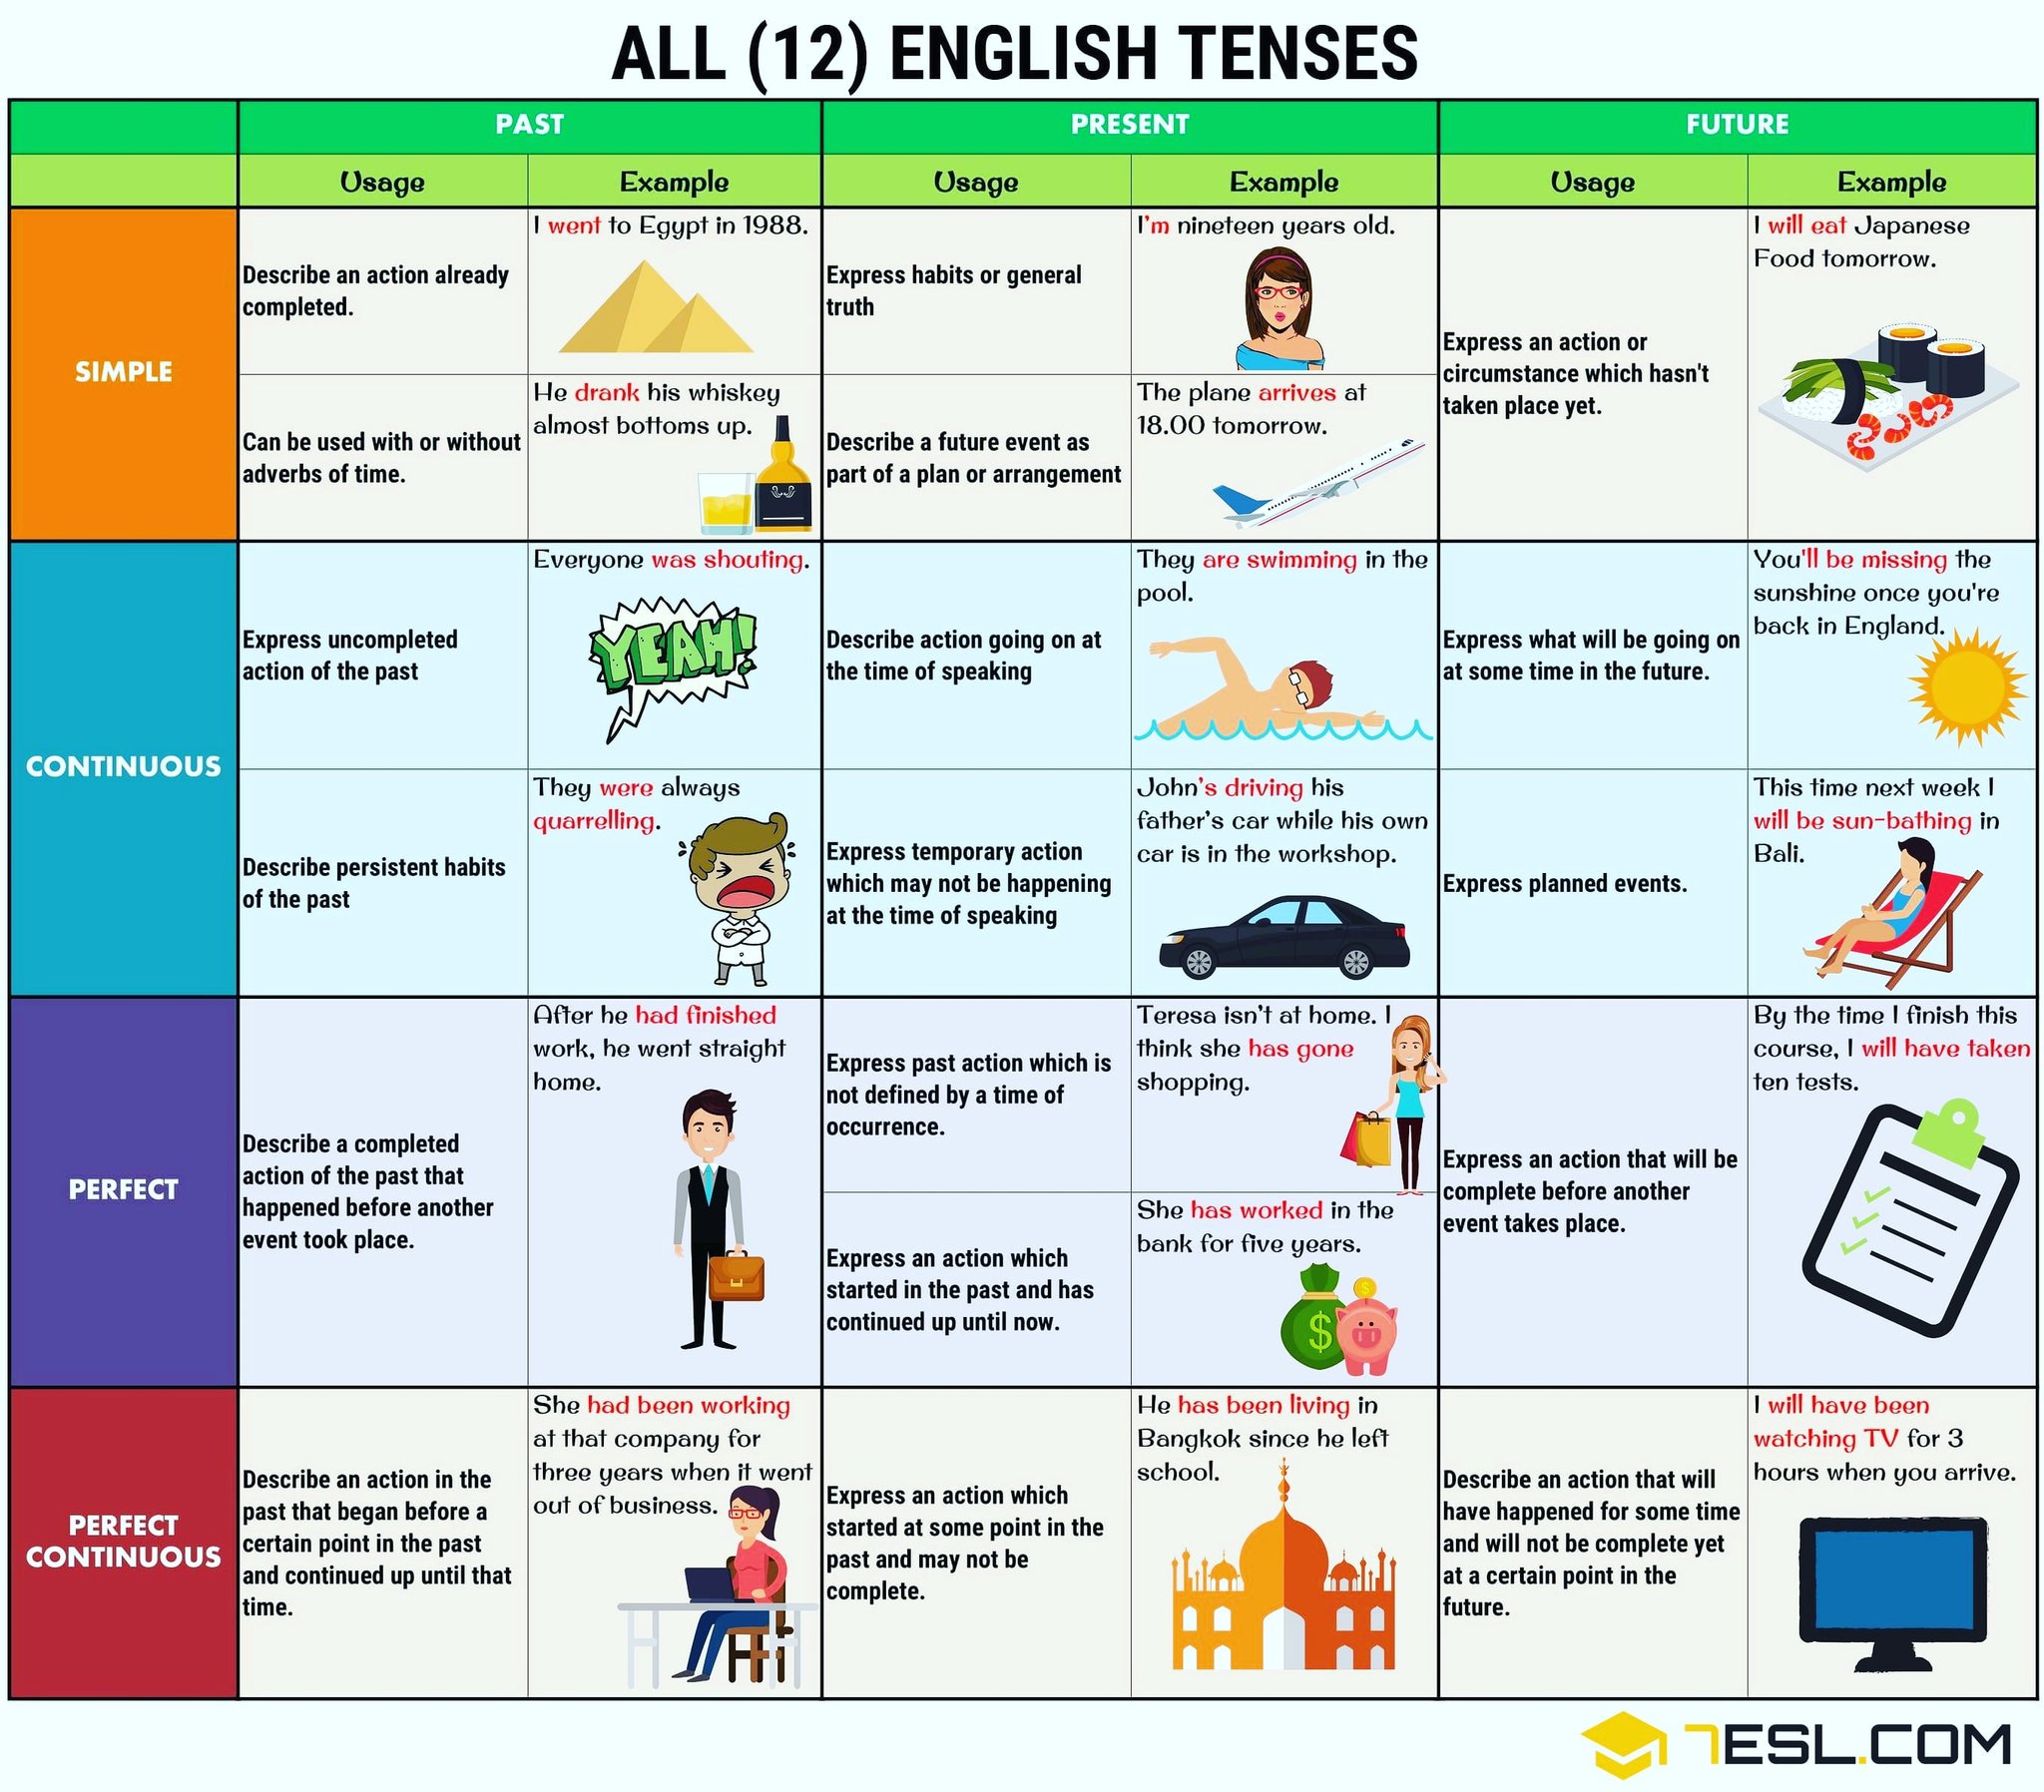 The English School All The 12 English Verb Tenses In One Table Learnenglish Grammar Learning Esl Languagelearning Language T Co Jci43eckdc Twitter